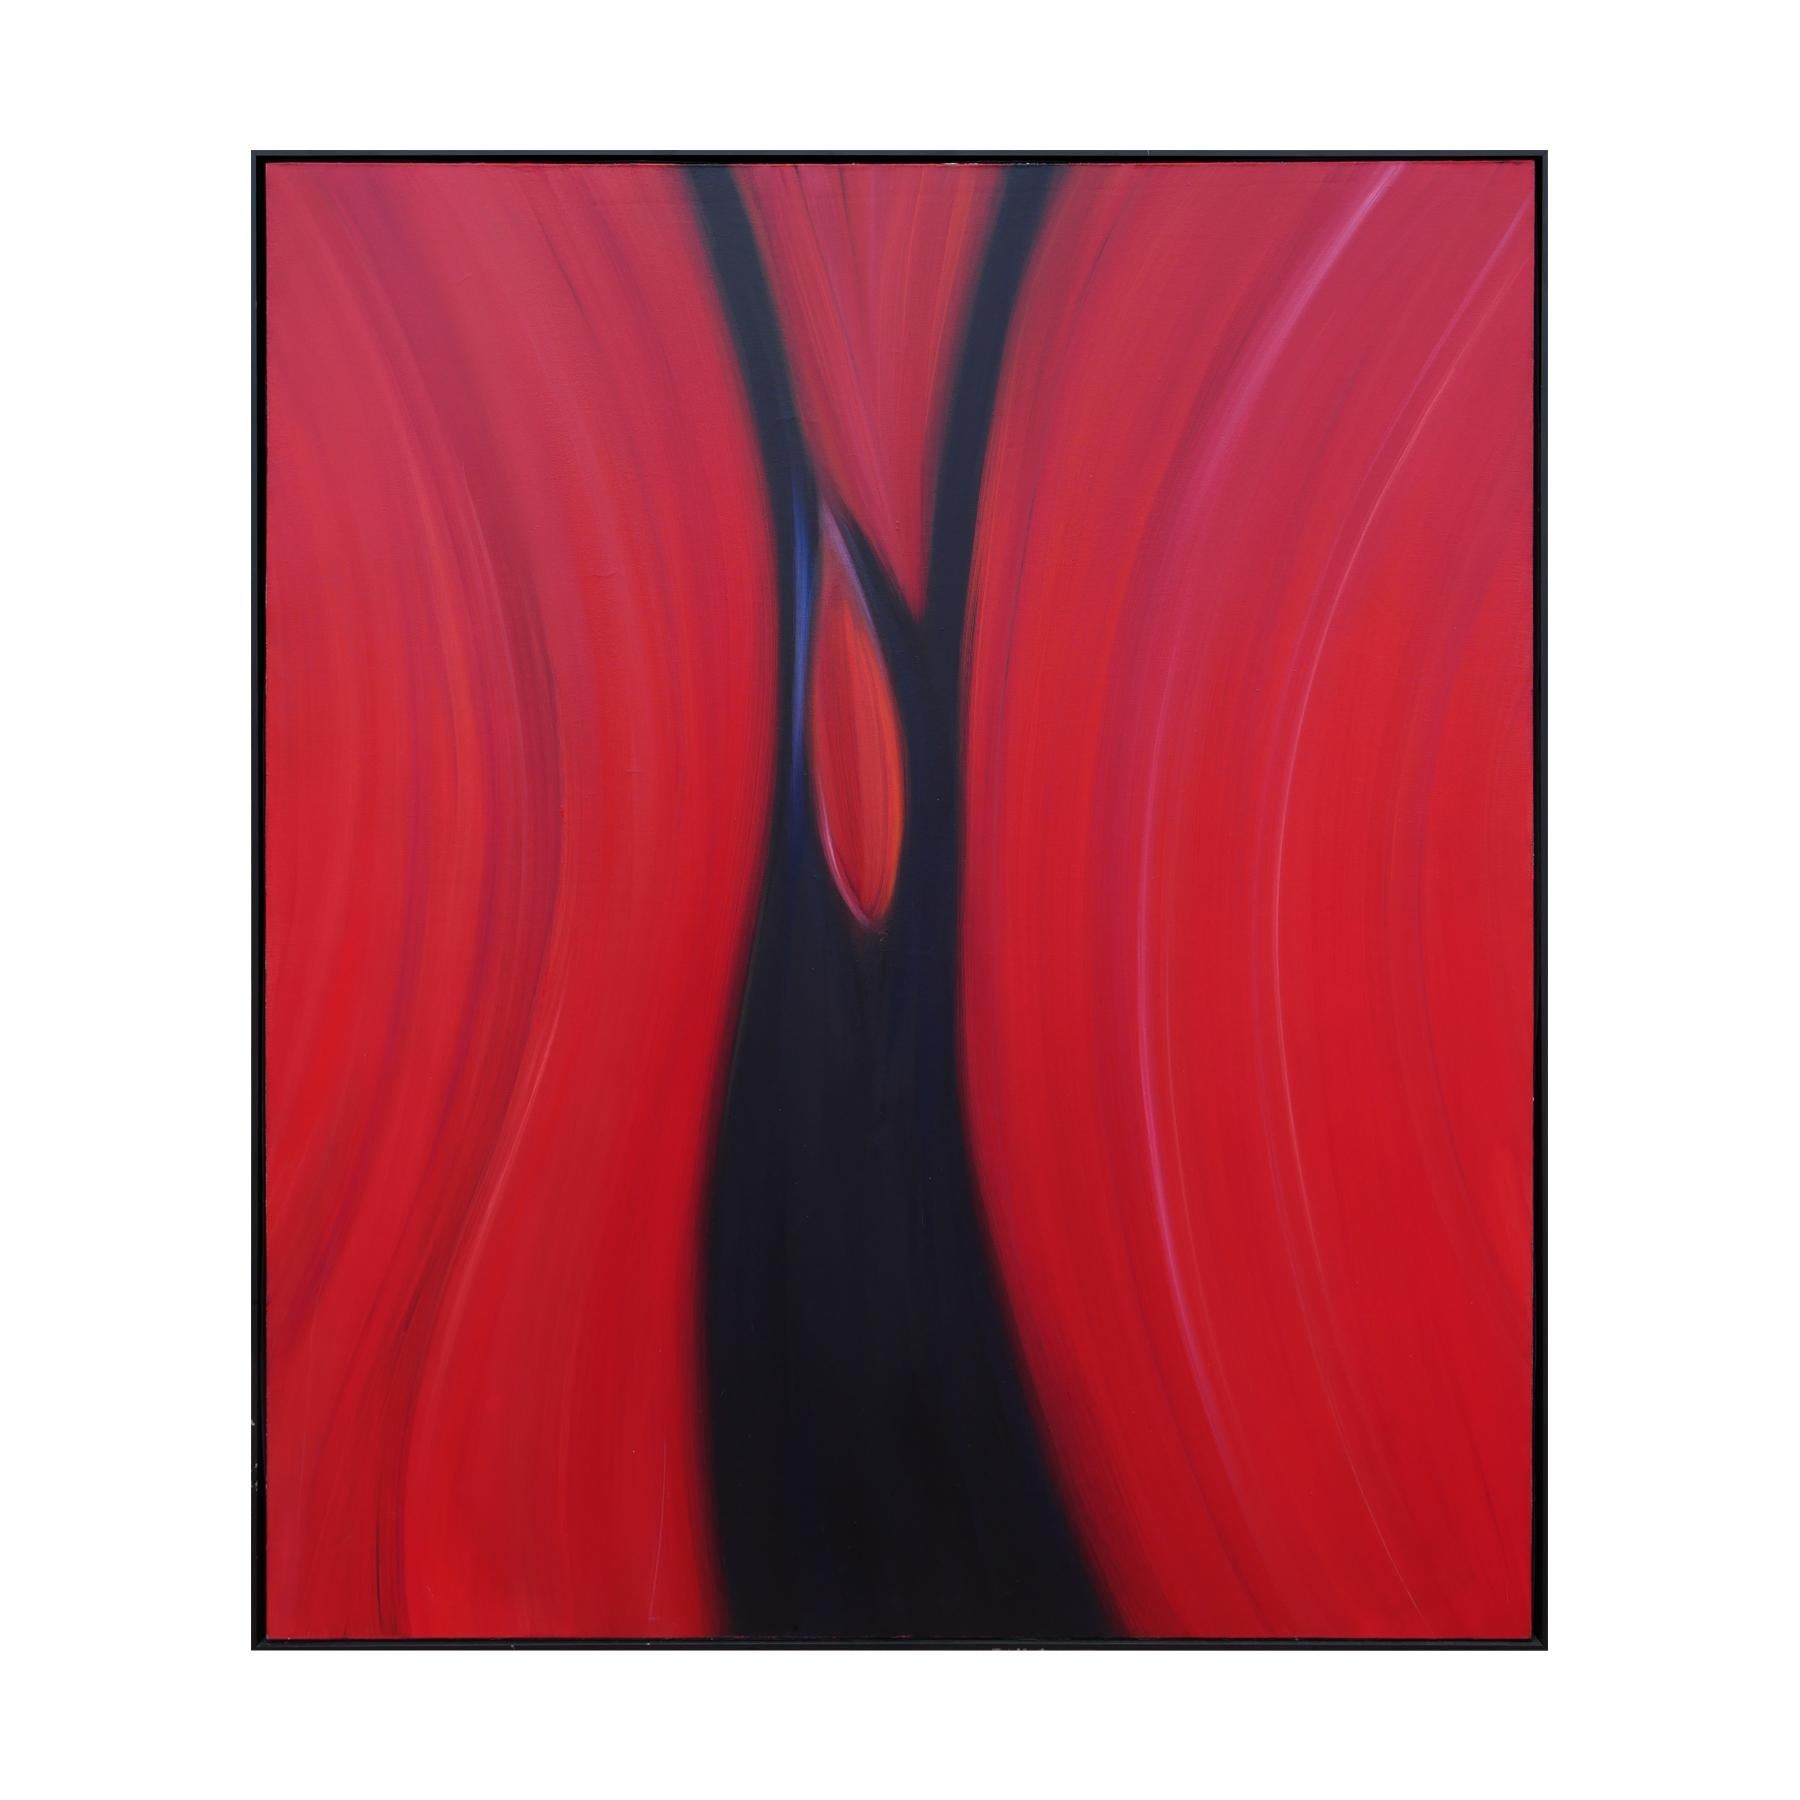 Red and black abstract contemporary painting by Santa Fe, NM artist Cheryl Kelley. This large piece depicts a flowy color-field abstract of bright reds and dark purple hues that turn into black. Unsigned. Framed in a black contemporary floating